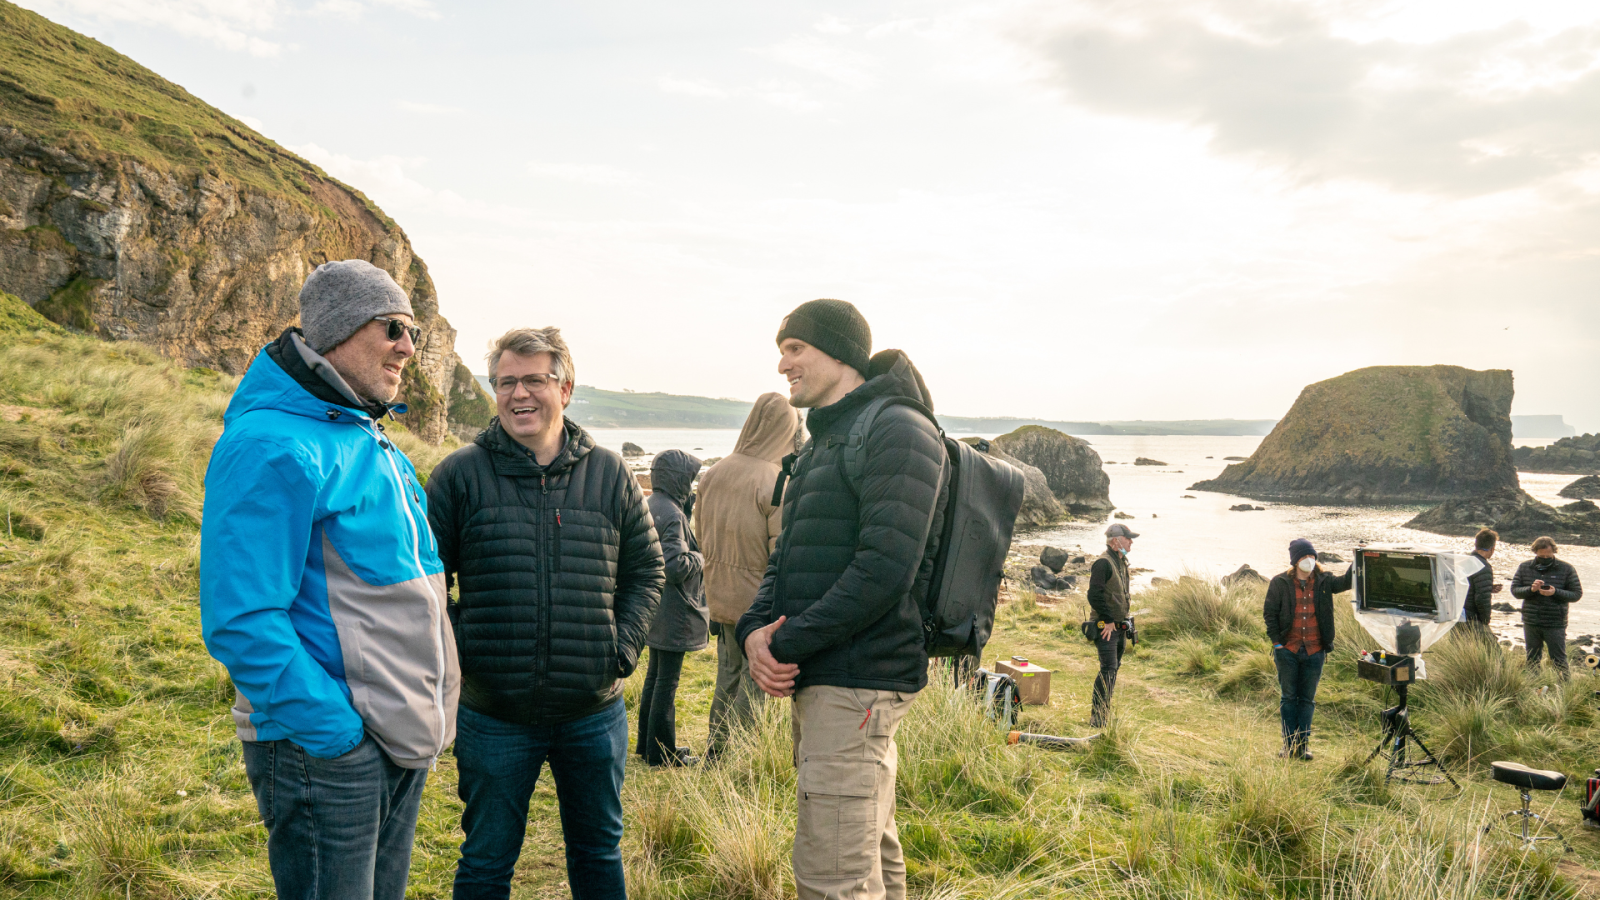 Ballintoy Beach – Behind the Scenes of the Dungeons and Dragons movie